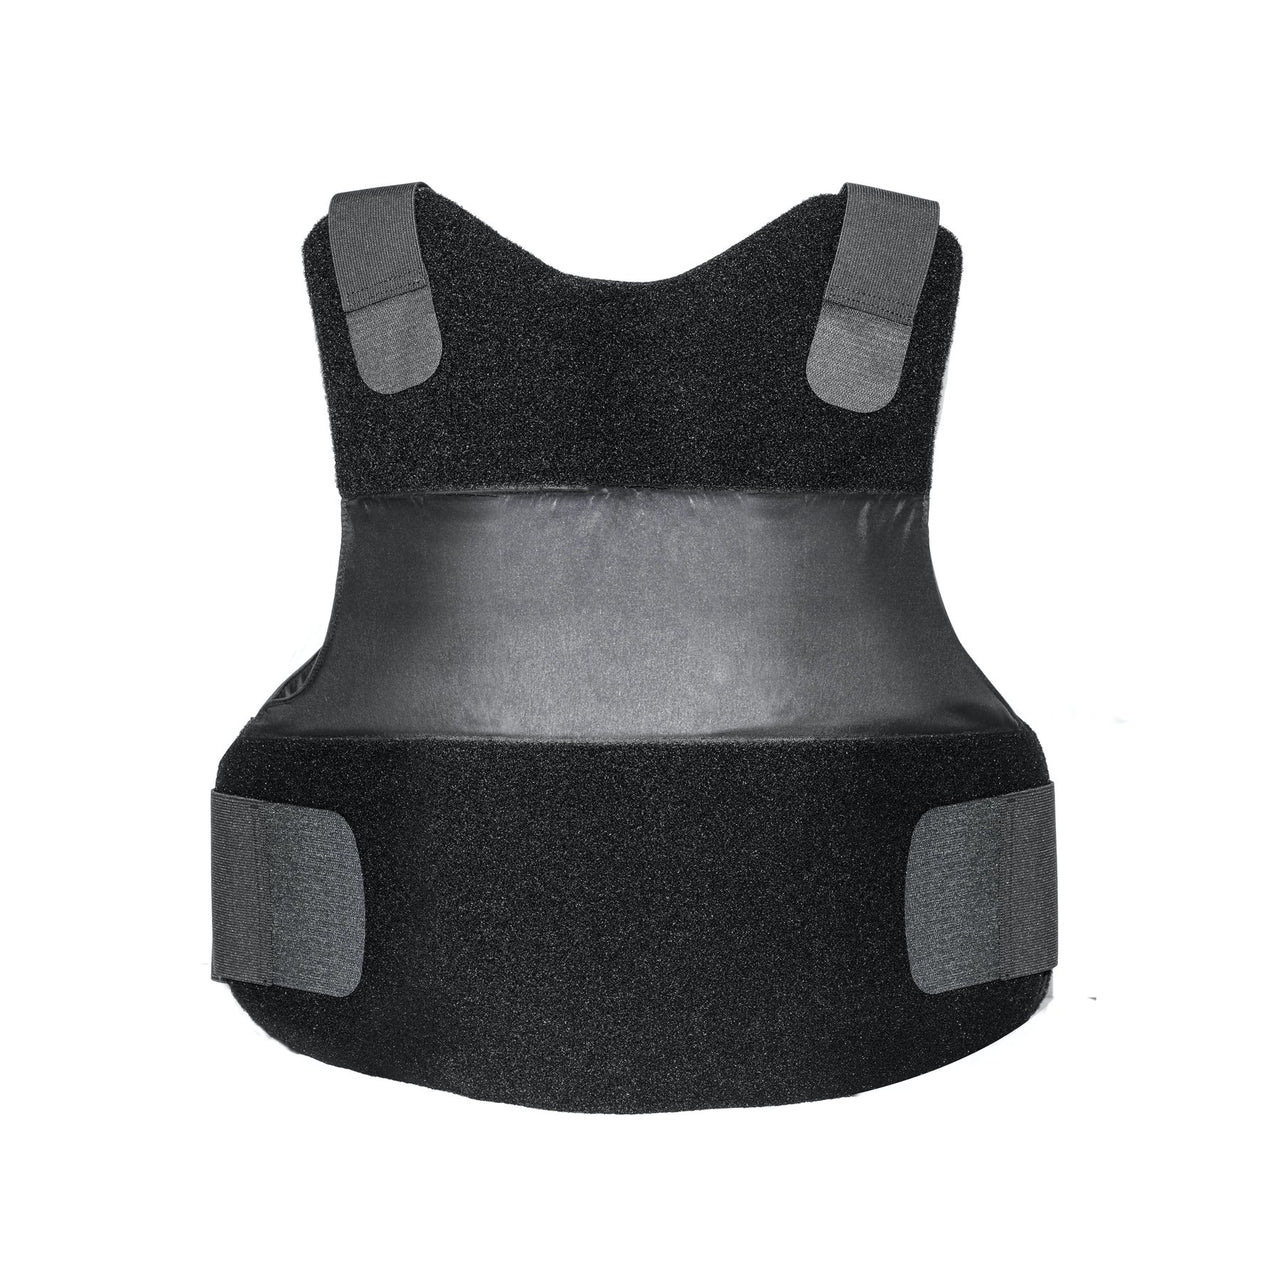 An image of the Body Armor Direct Freedom Concealable Carrier vest.